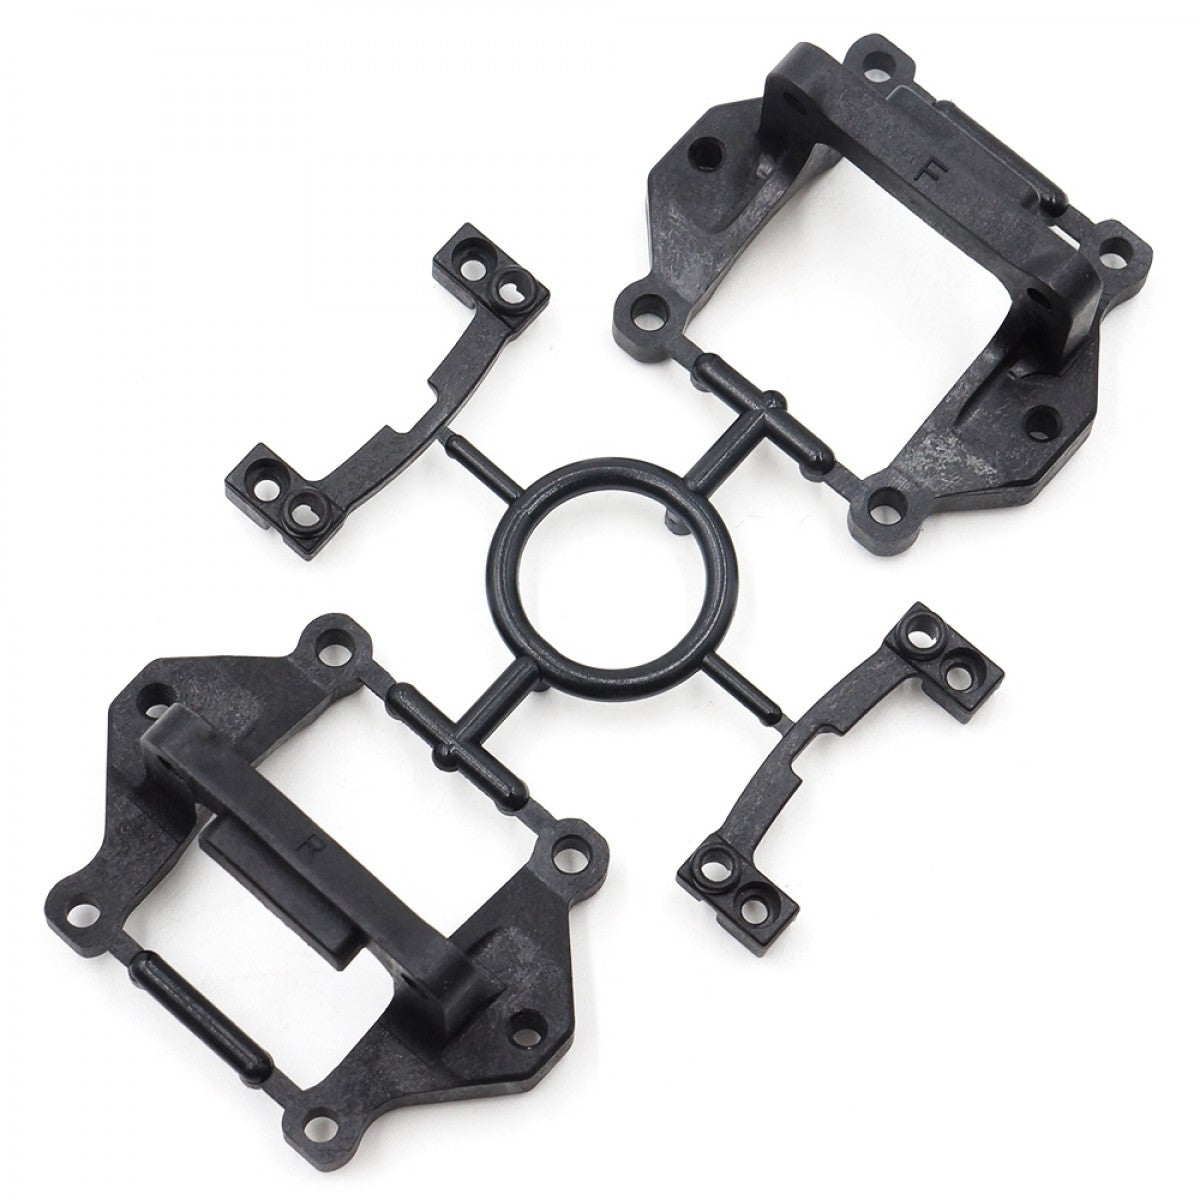 Xpress XP-10230 XQ1S Front and Rear Composite One Piece Upper Clamp